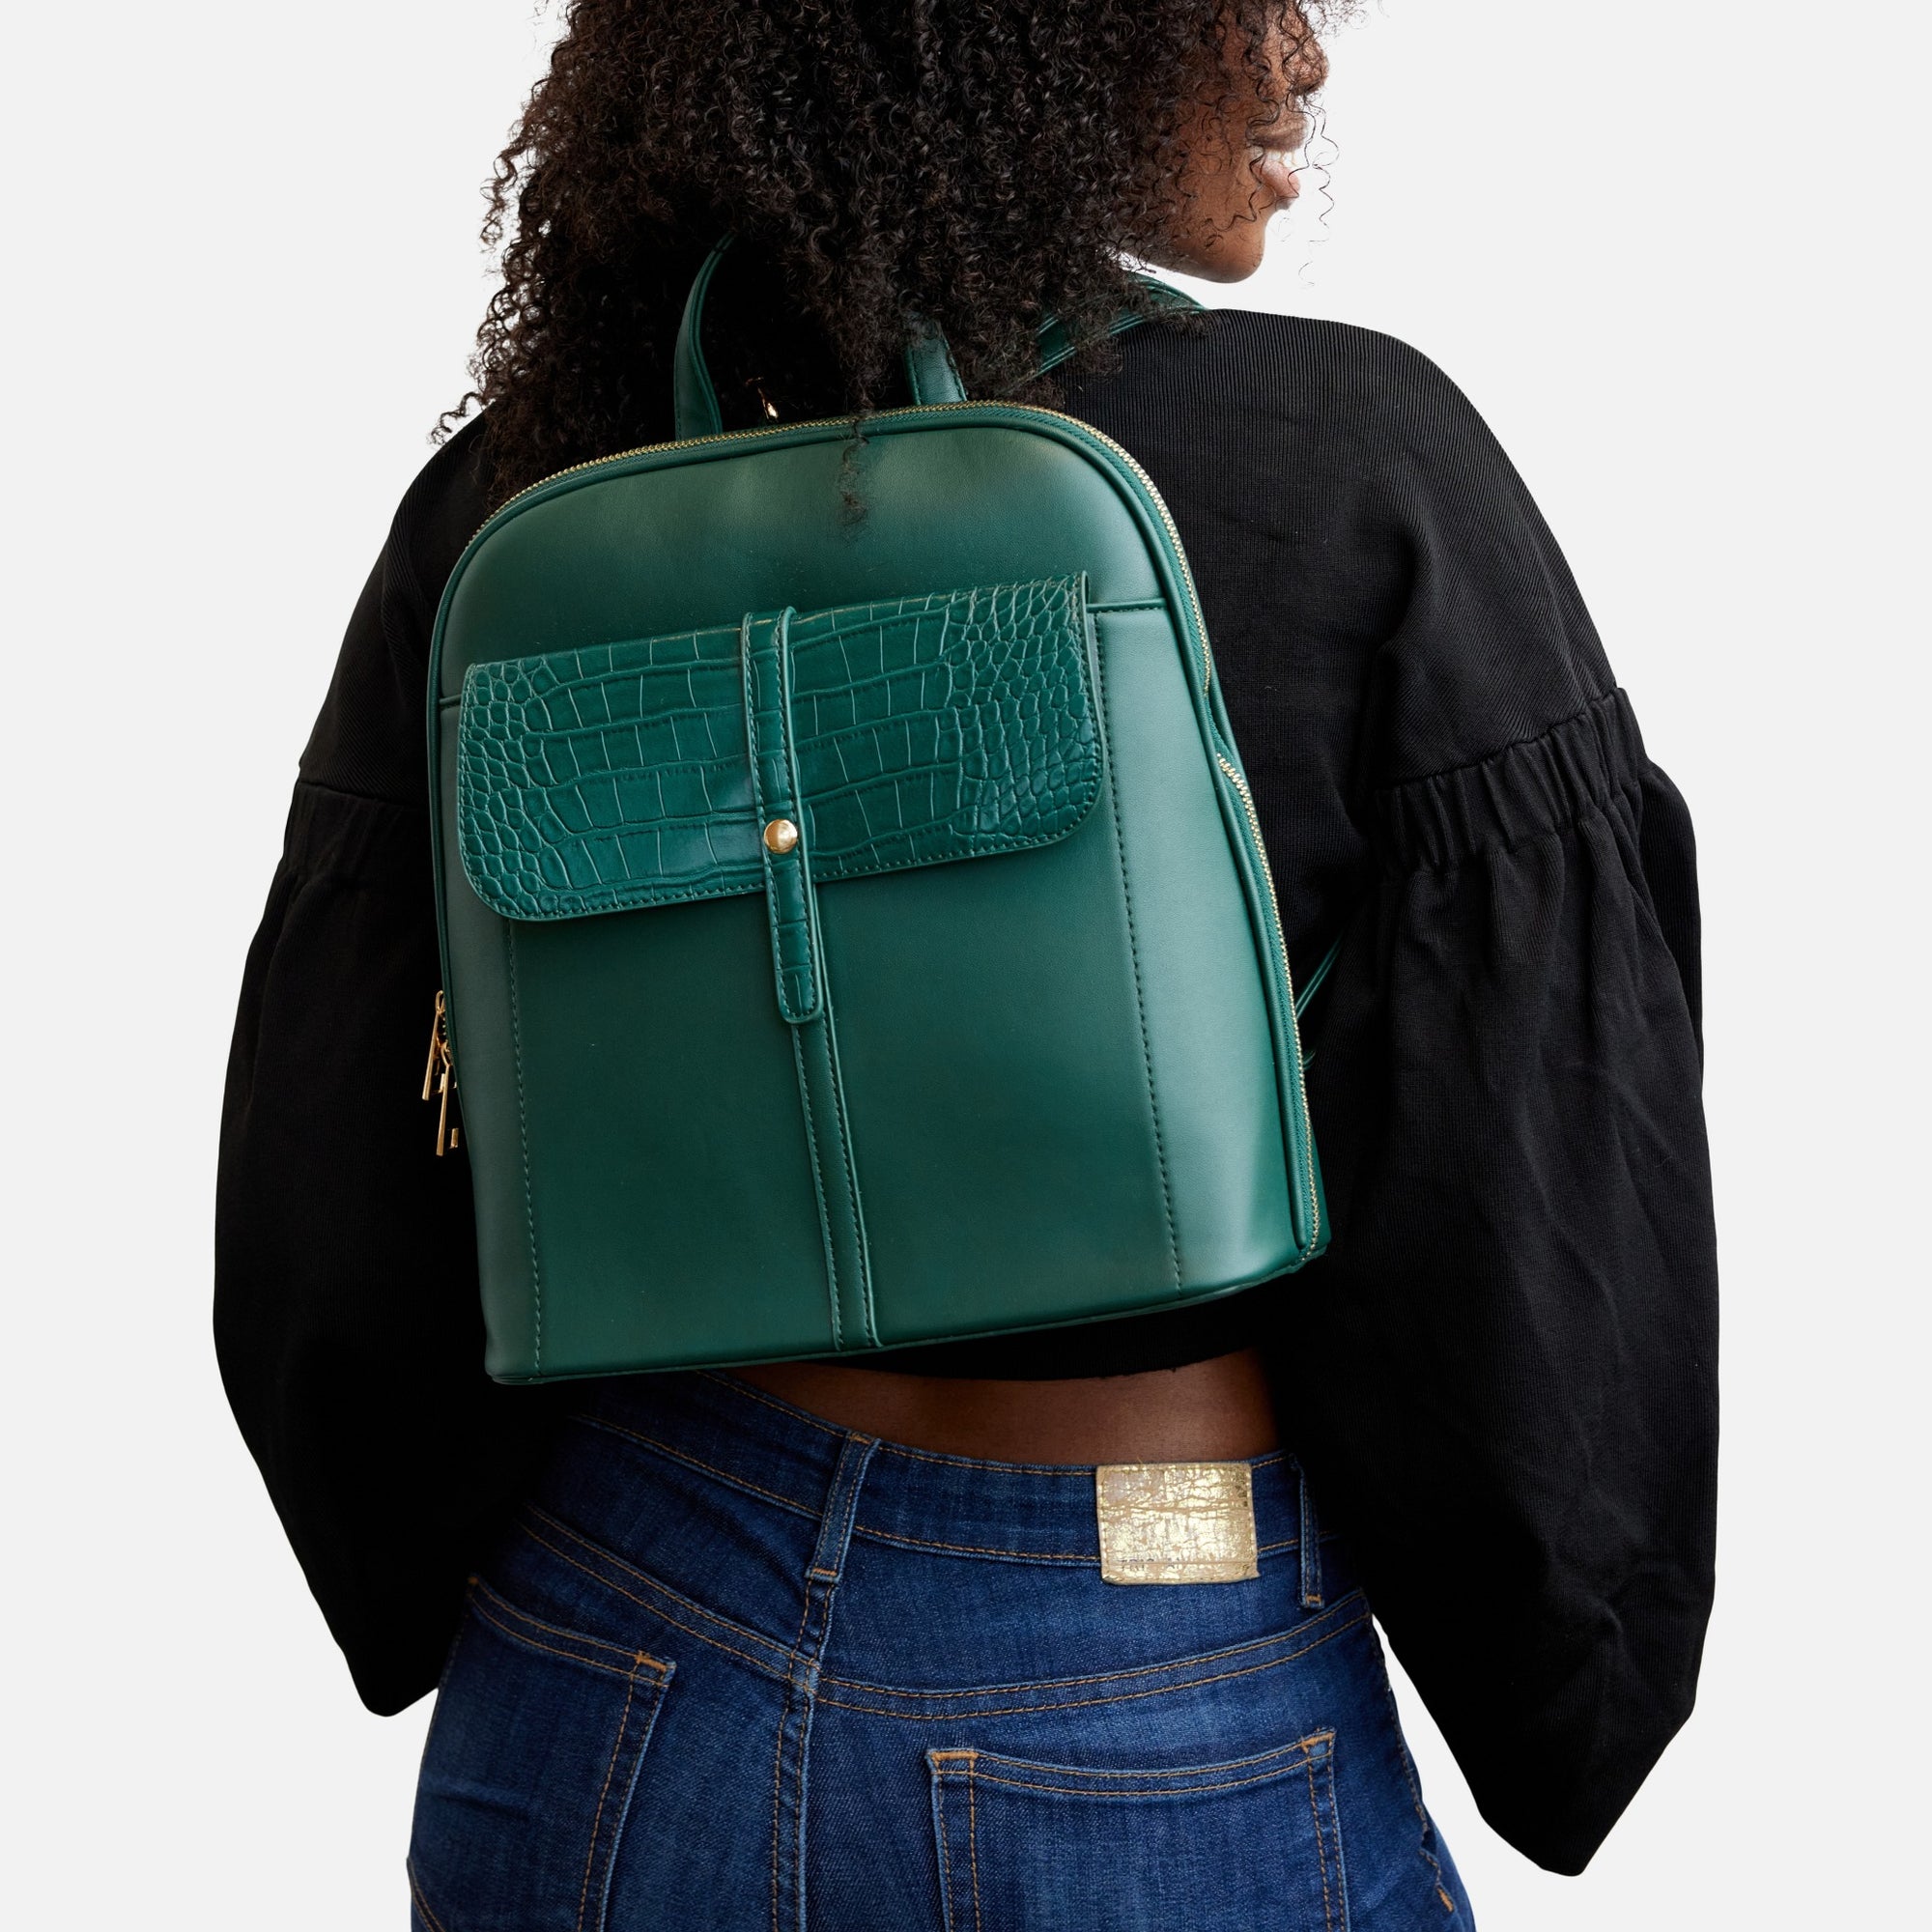 Green square backpack with front pocket and flap